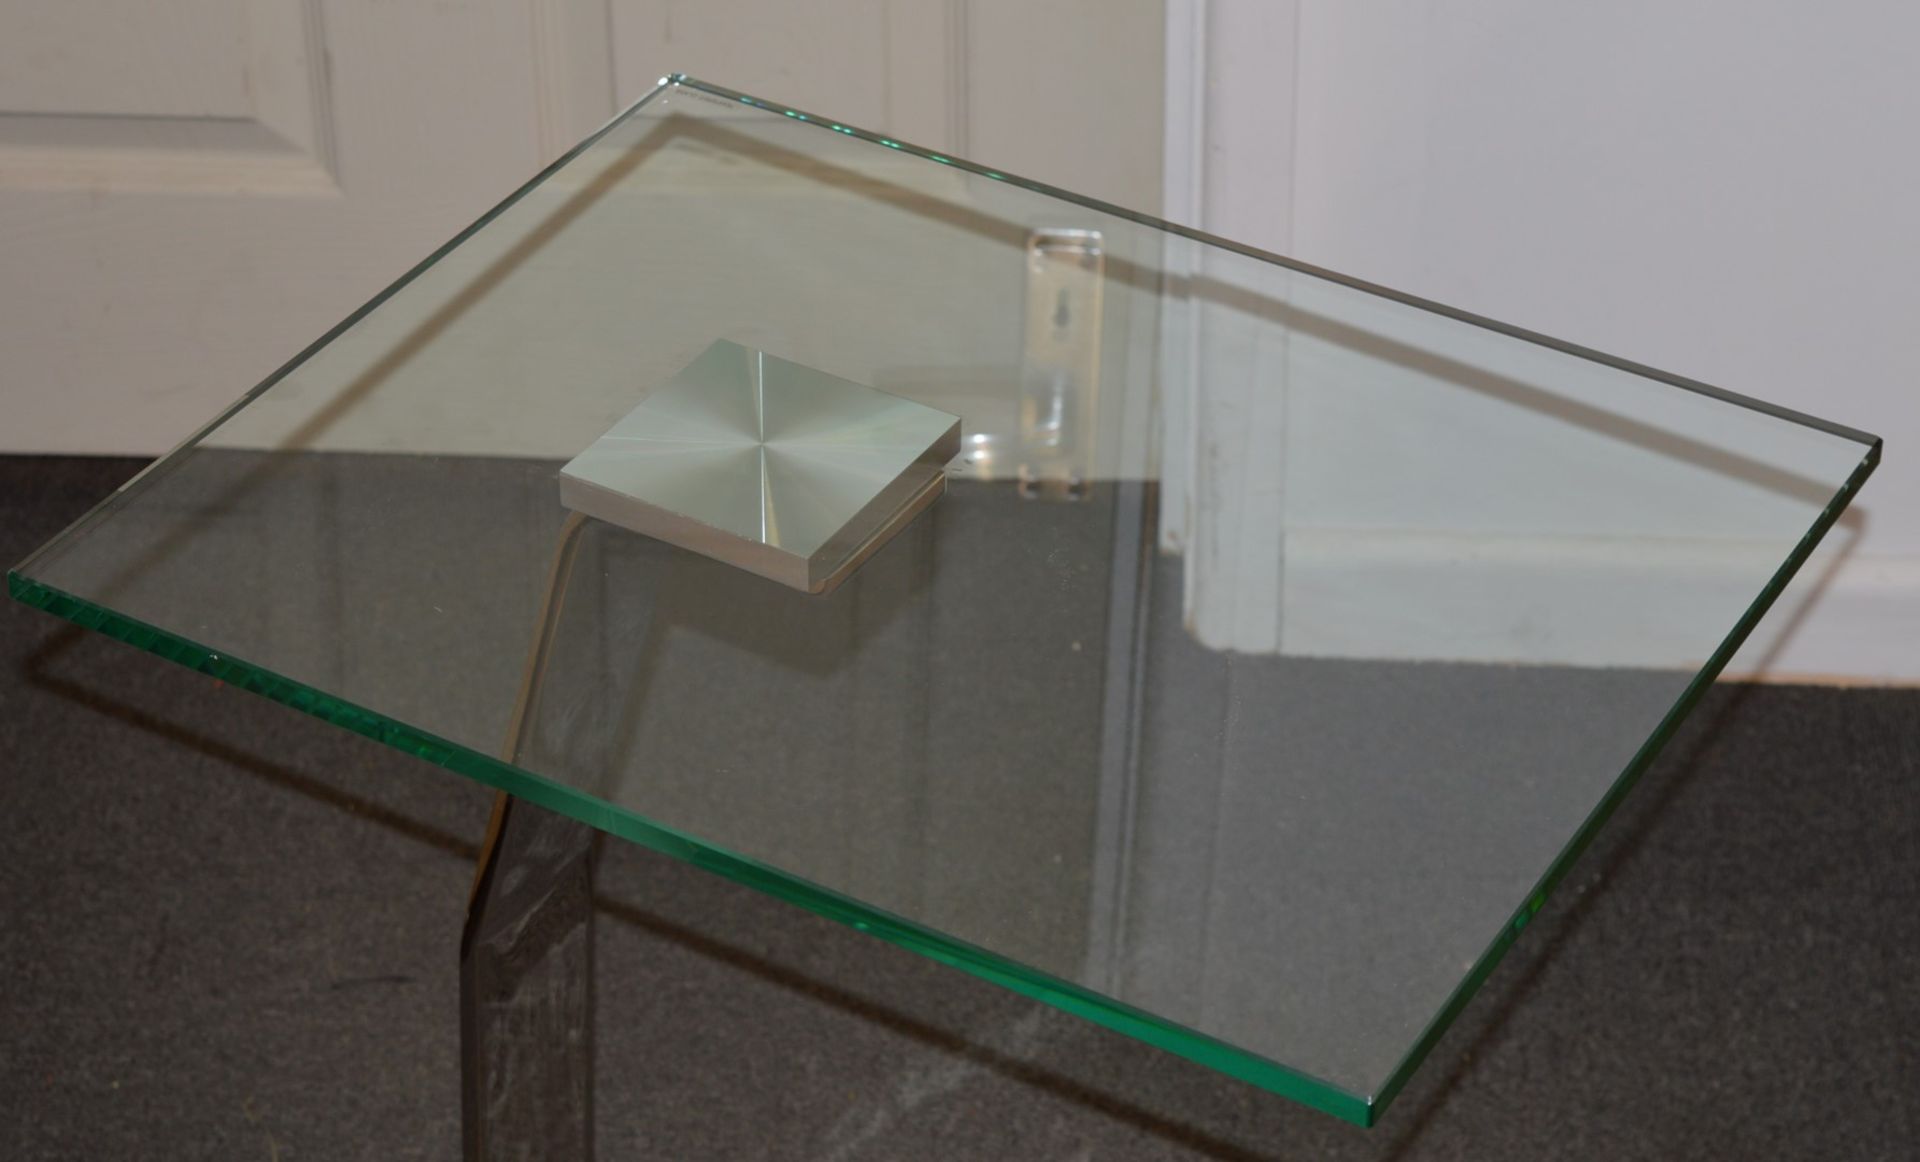 1 x Designer Chelsom Lamp Table - CL081 - Chrome Base With Clear Tempered Glass Top - Stunning - Image 3 of 6